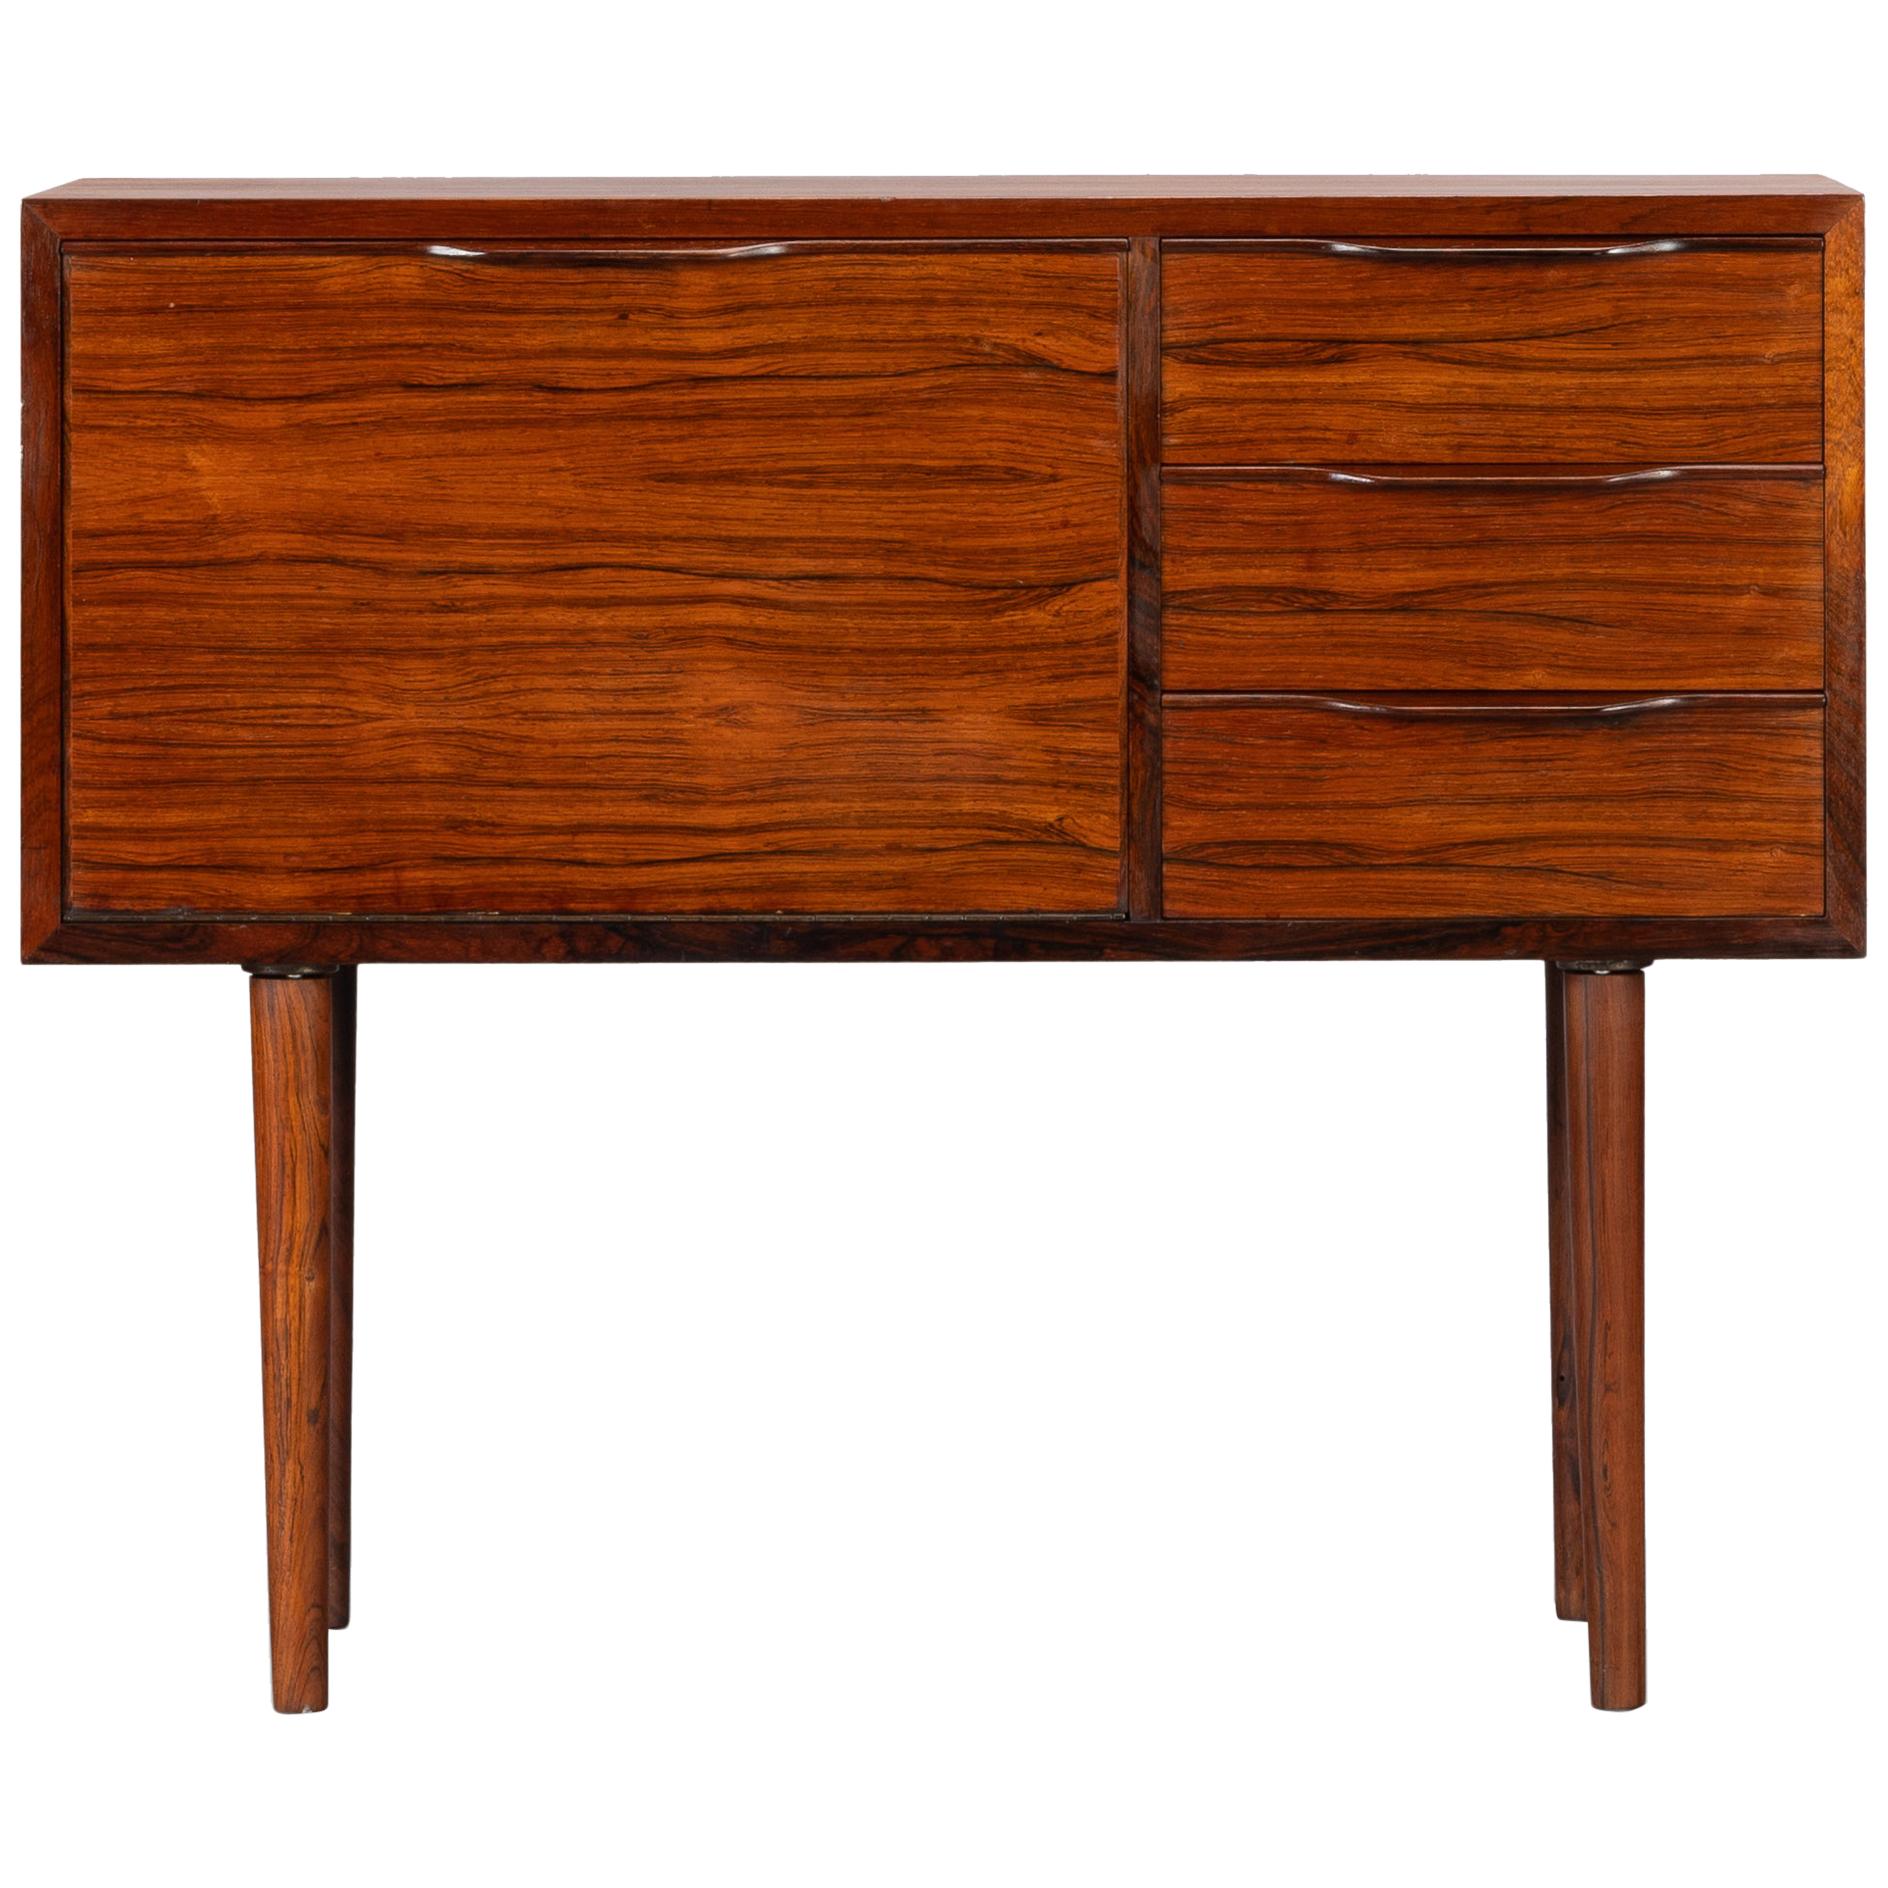 Danish Mid-Century Modern Small Chest with Drawers, 1960s